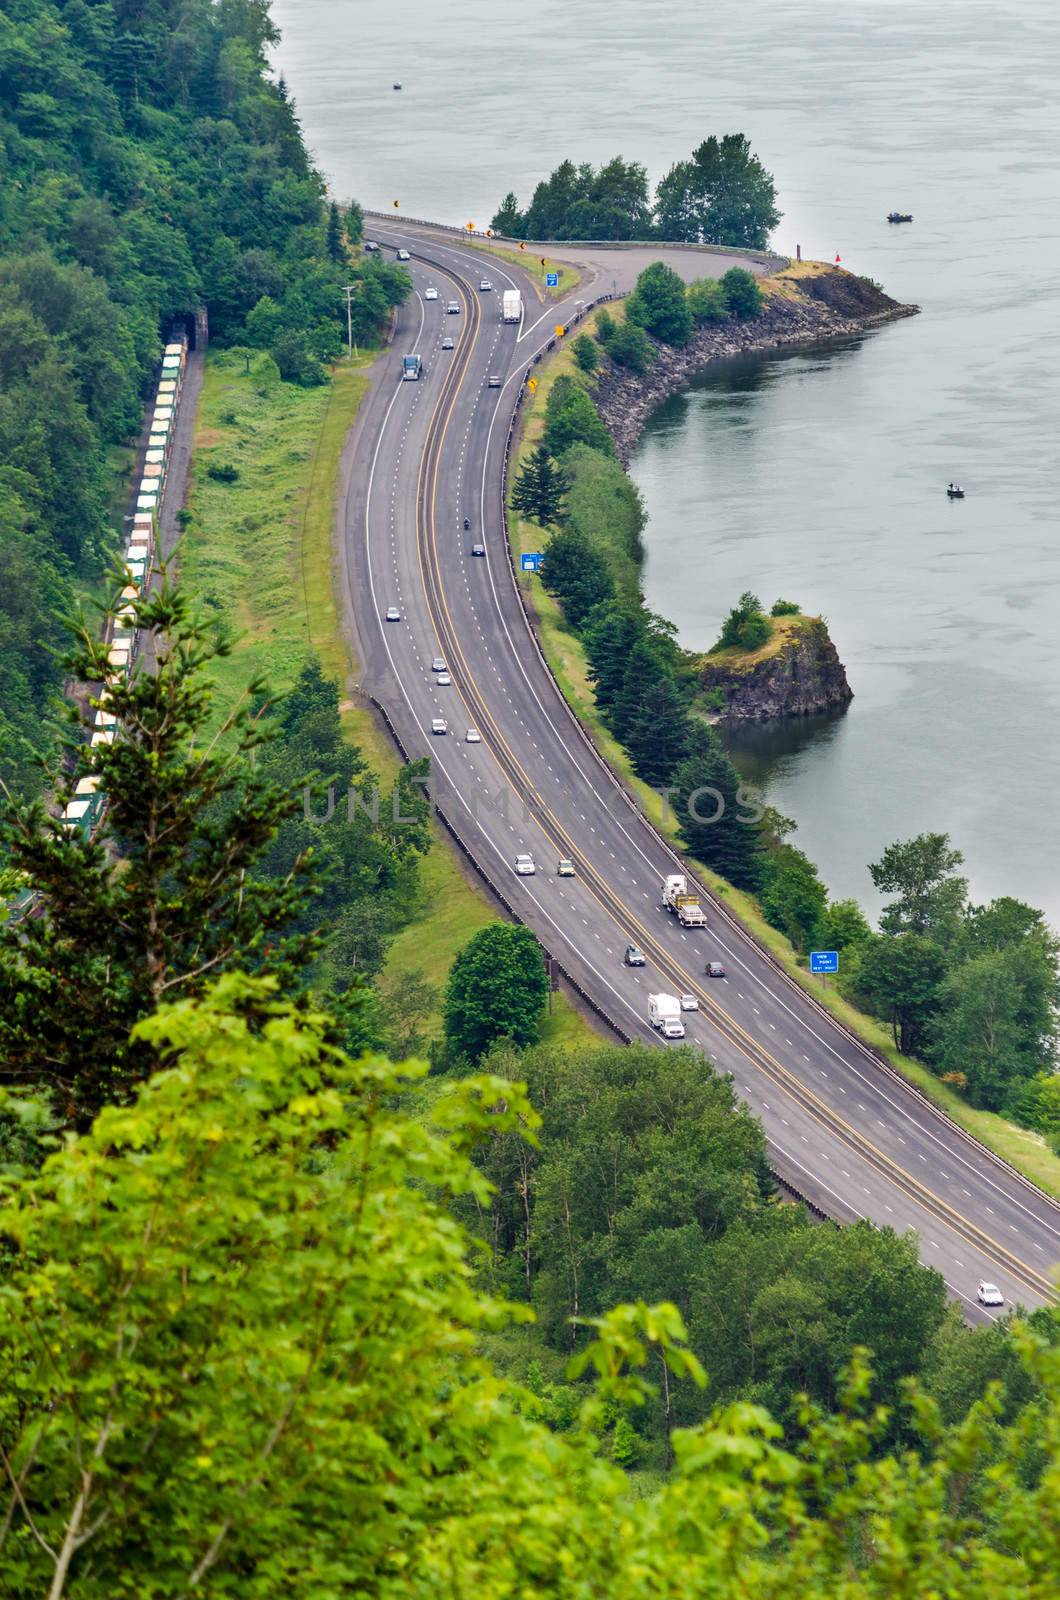 Interstate 84 running through the Columbia River Gorge in Oregon